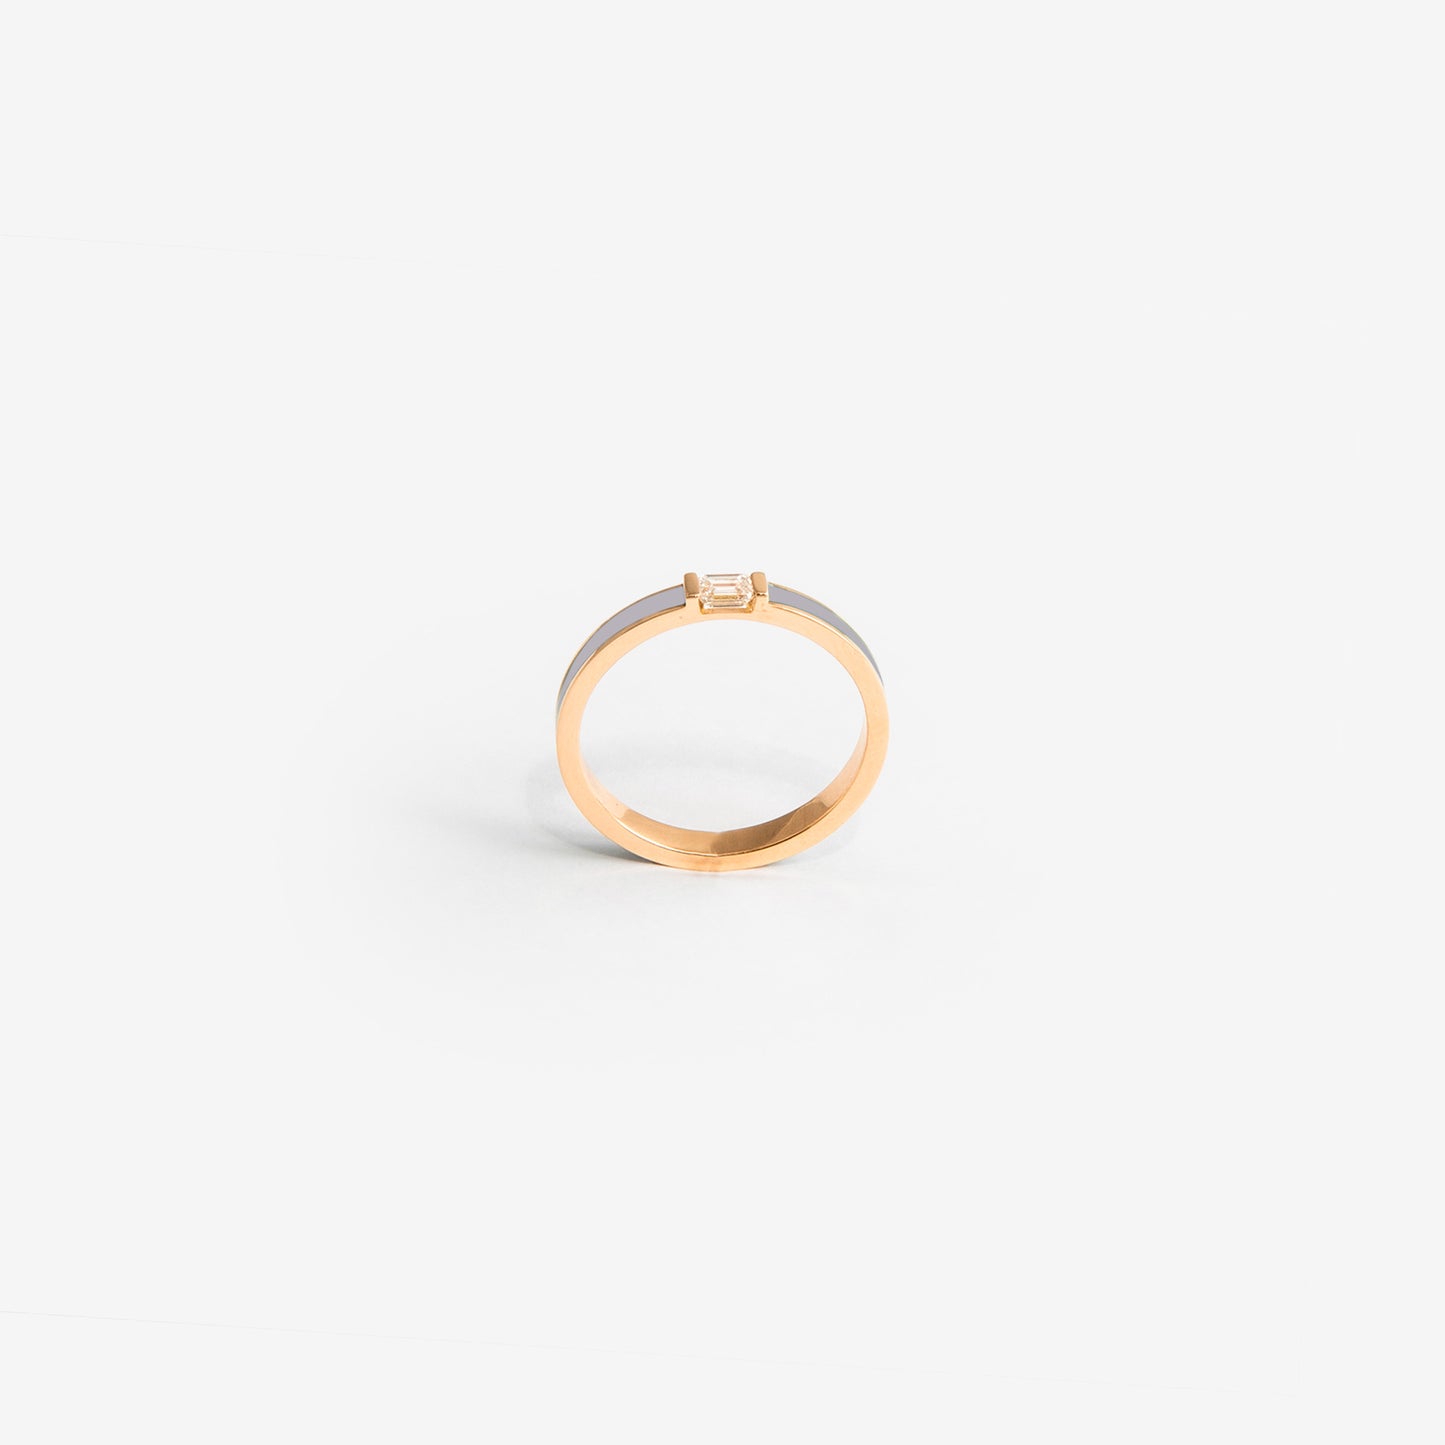 Rose gold band ring with cool gray enamel and diamond